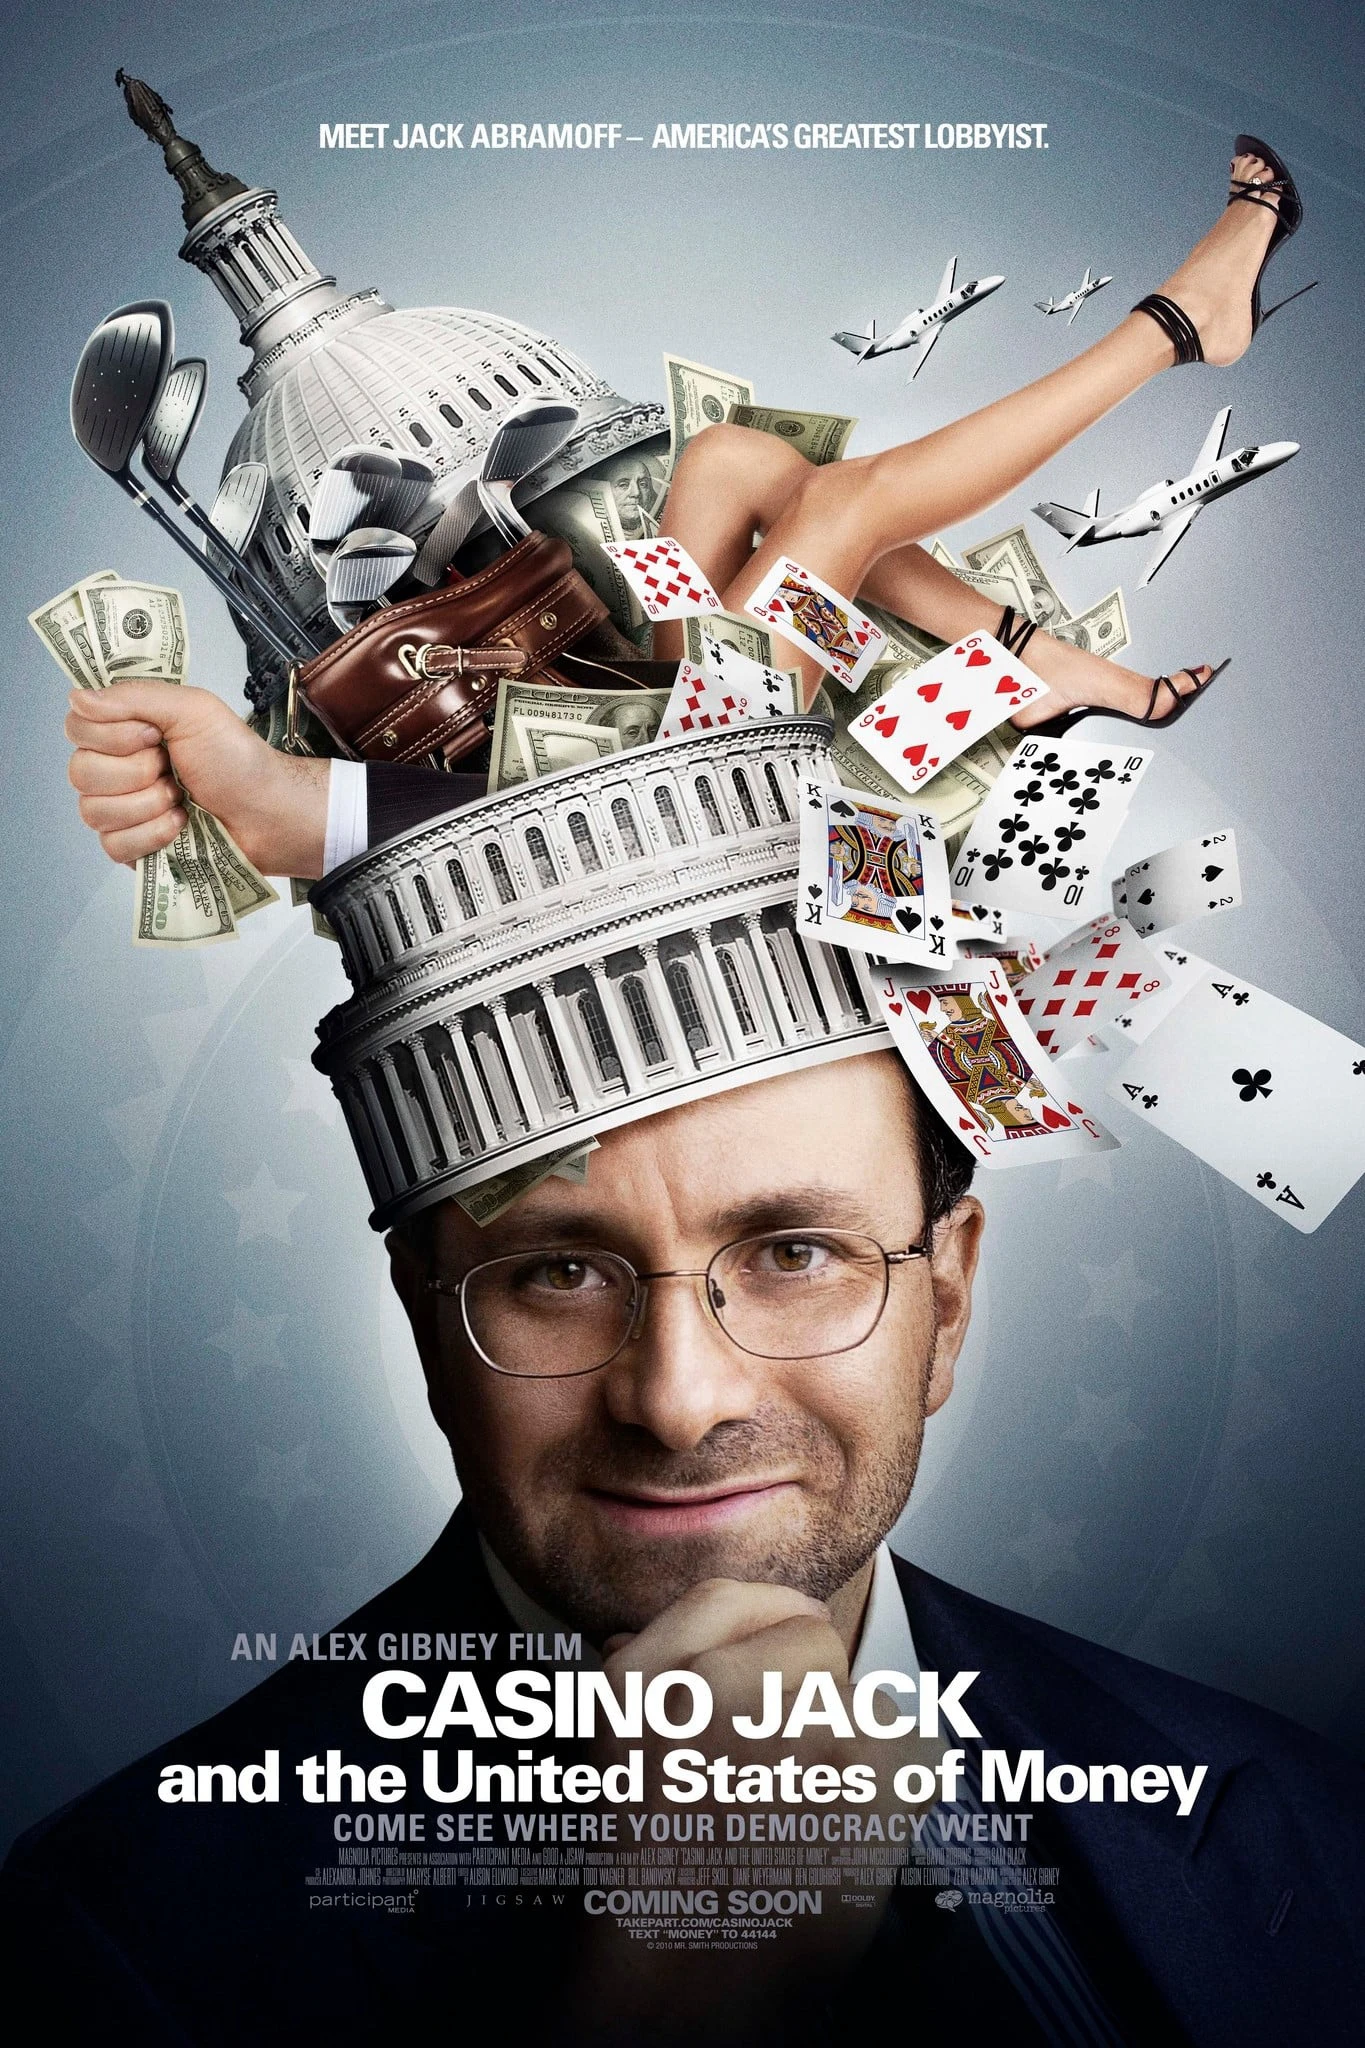 Casino Jack and the United States of Money | Casino Jack and the United States of Money (2010)